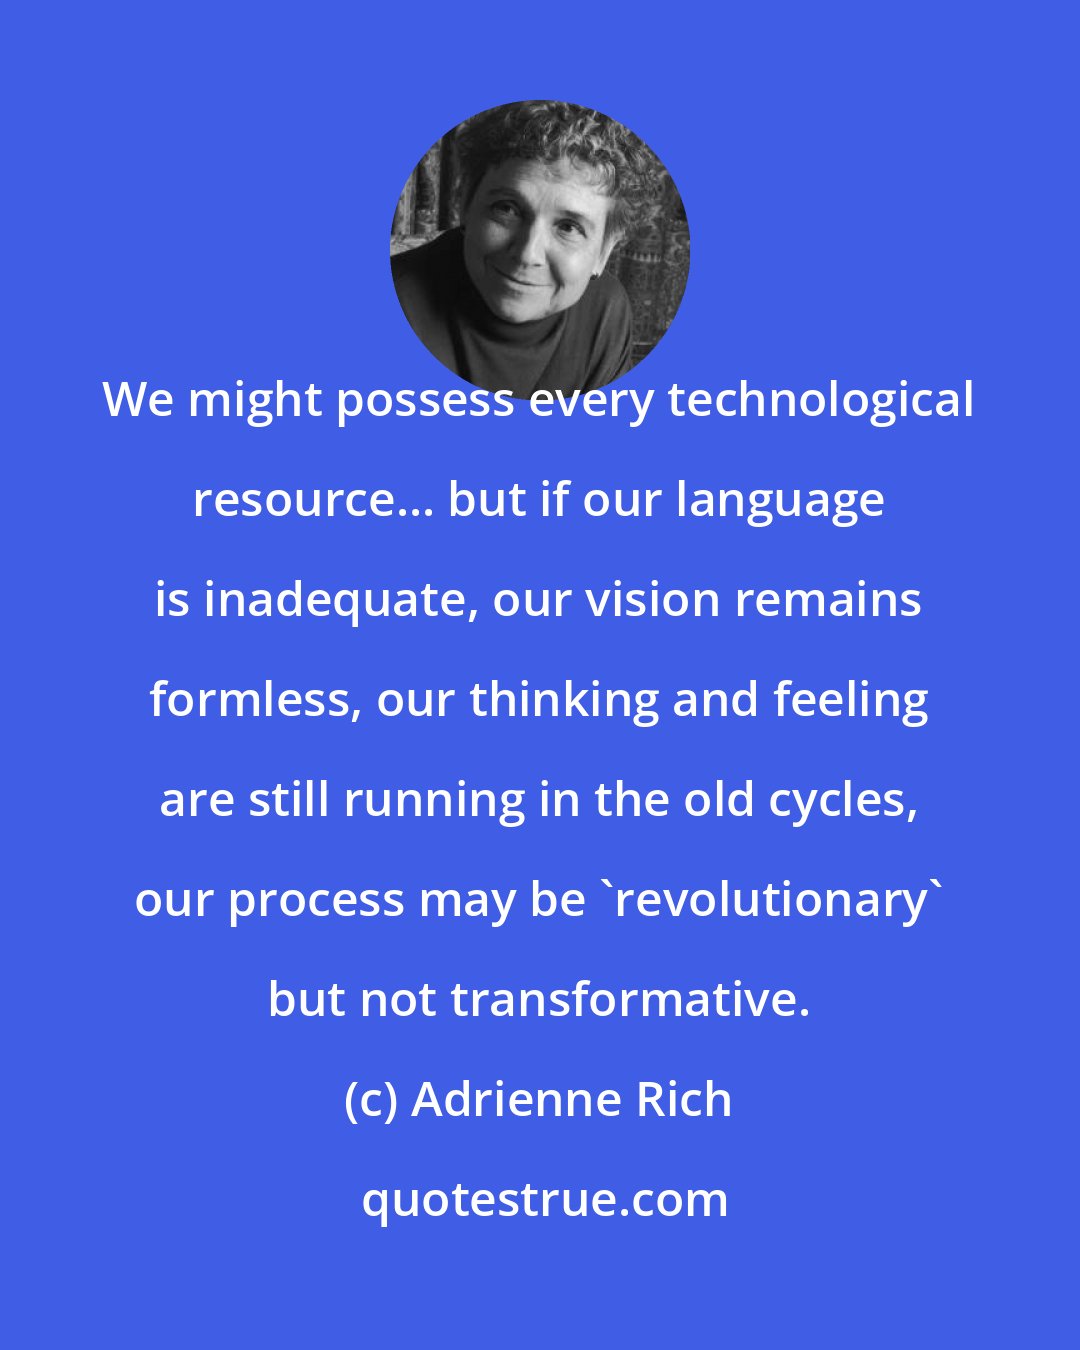 Adrienne Rich: We might possess every technological resource... but if our language is inadequate, our vision remains formless, our thinking and feeling are still running in the old cycles, our process may be 'revolutionary' but not transformative.